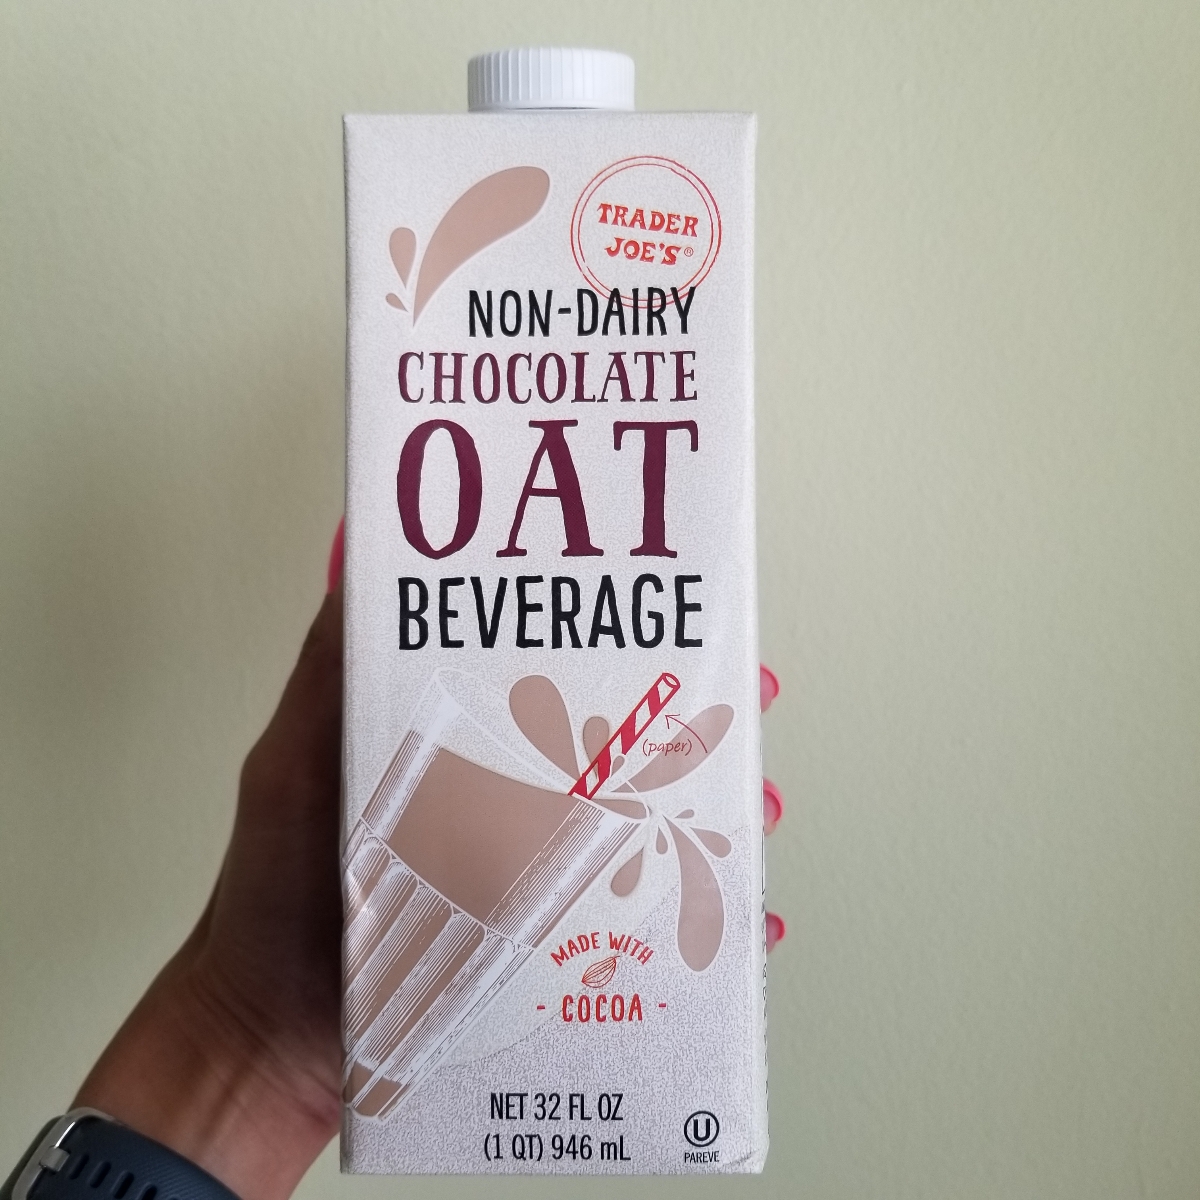 Trader Joe's Non-Dairy Chocolate Oat Beverage Reviews | abillion